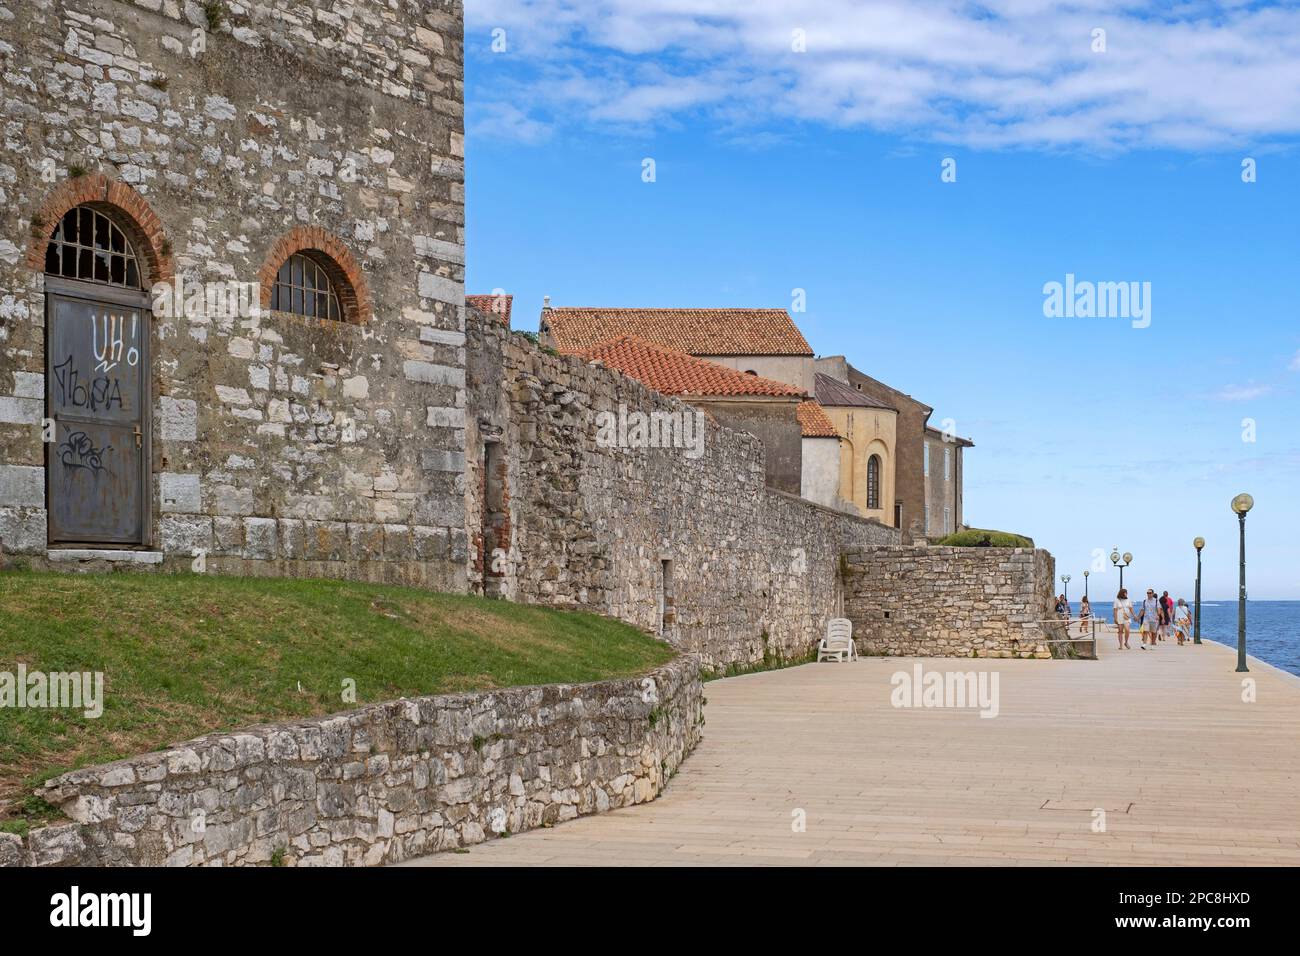 Tourists walking on promenade along ancient city wall in the town Poreč / Parenzo, seaside resort at the Adriatic Sea, Istria County, Croatia Stock Photo